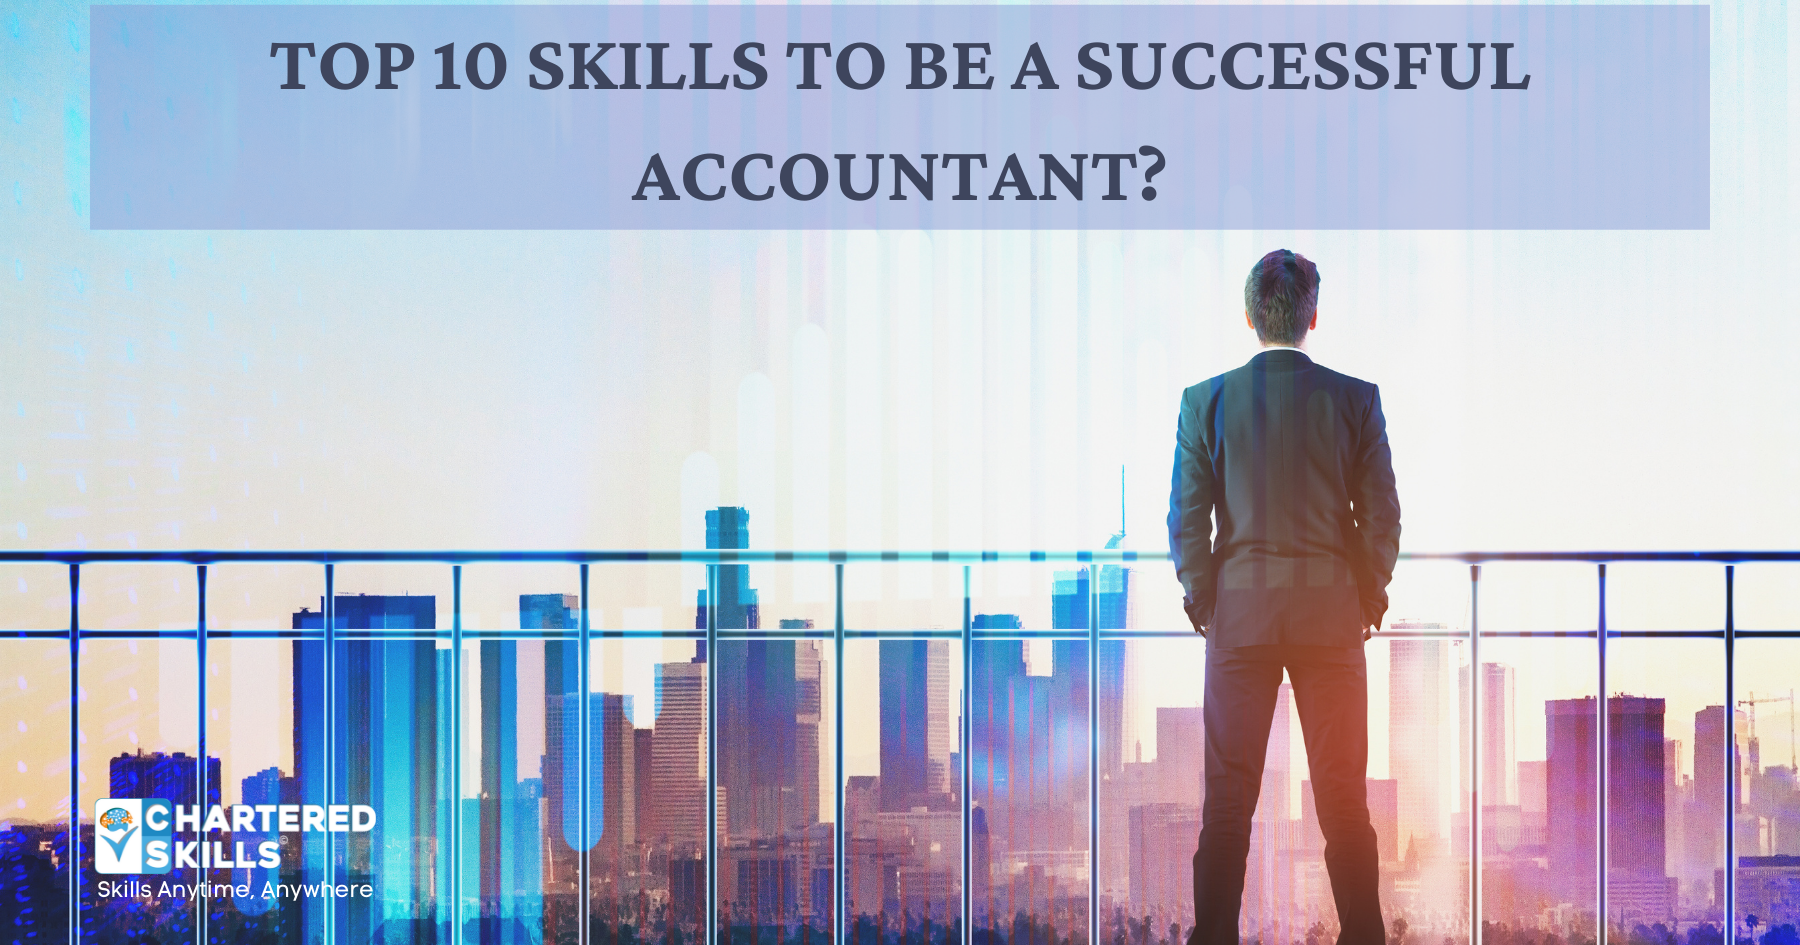 Top 10 skills to be a successful accountant